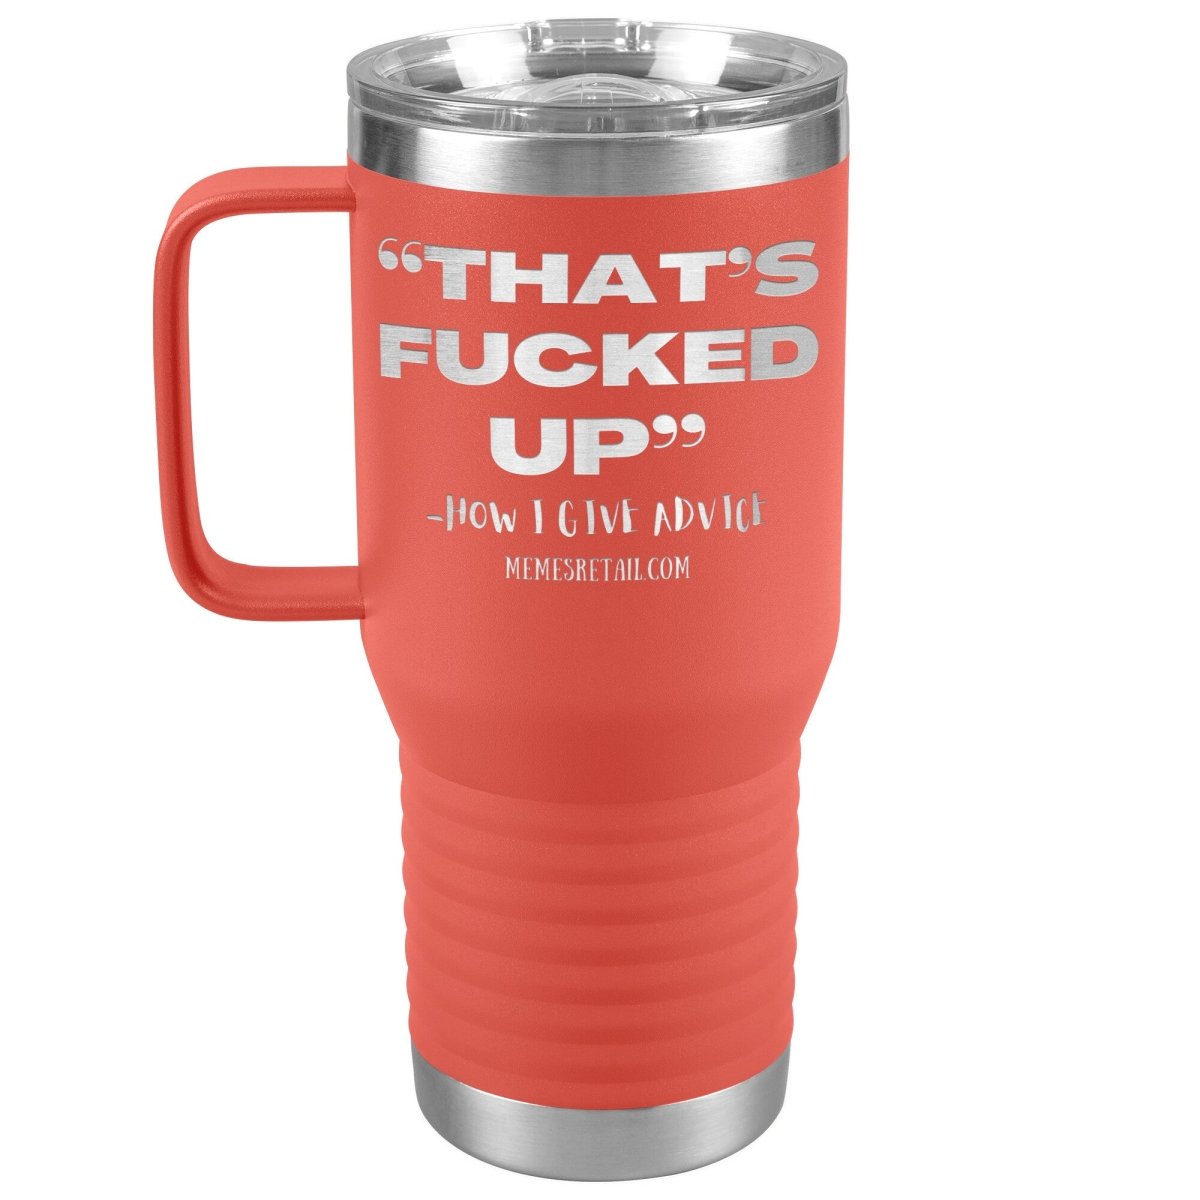 “That’s Fucked Up” -how I give advice Tumblers, 20oz Travel Tumbler / Coral - MemesRetail.com